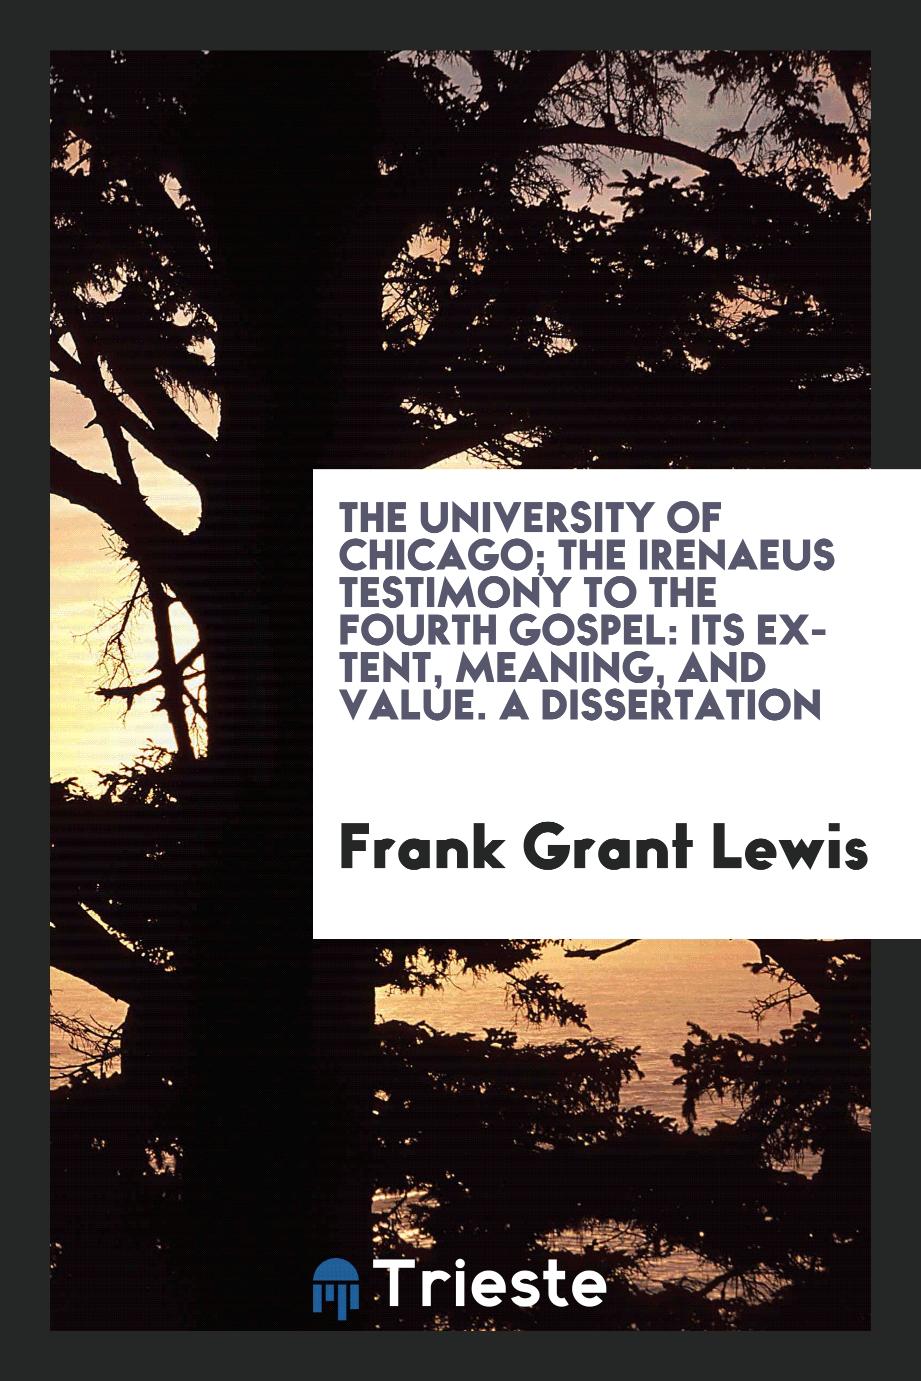 The University of Chicago; The Irenaeus Testimony to the Fourth Gospel: Its Extent, Meaning, and Value. A Dissertation